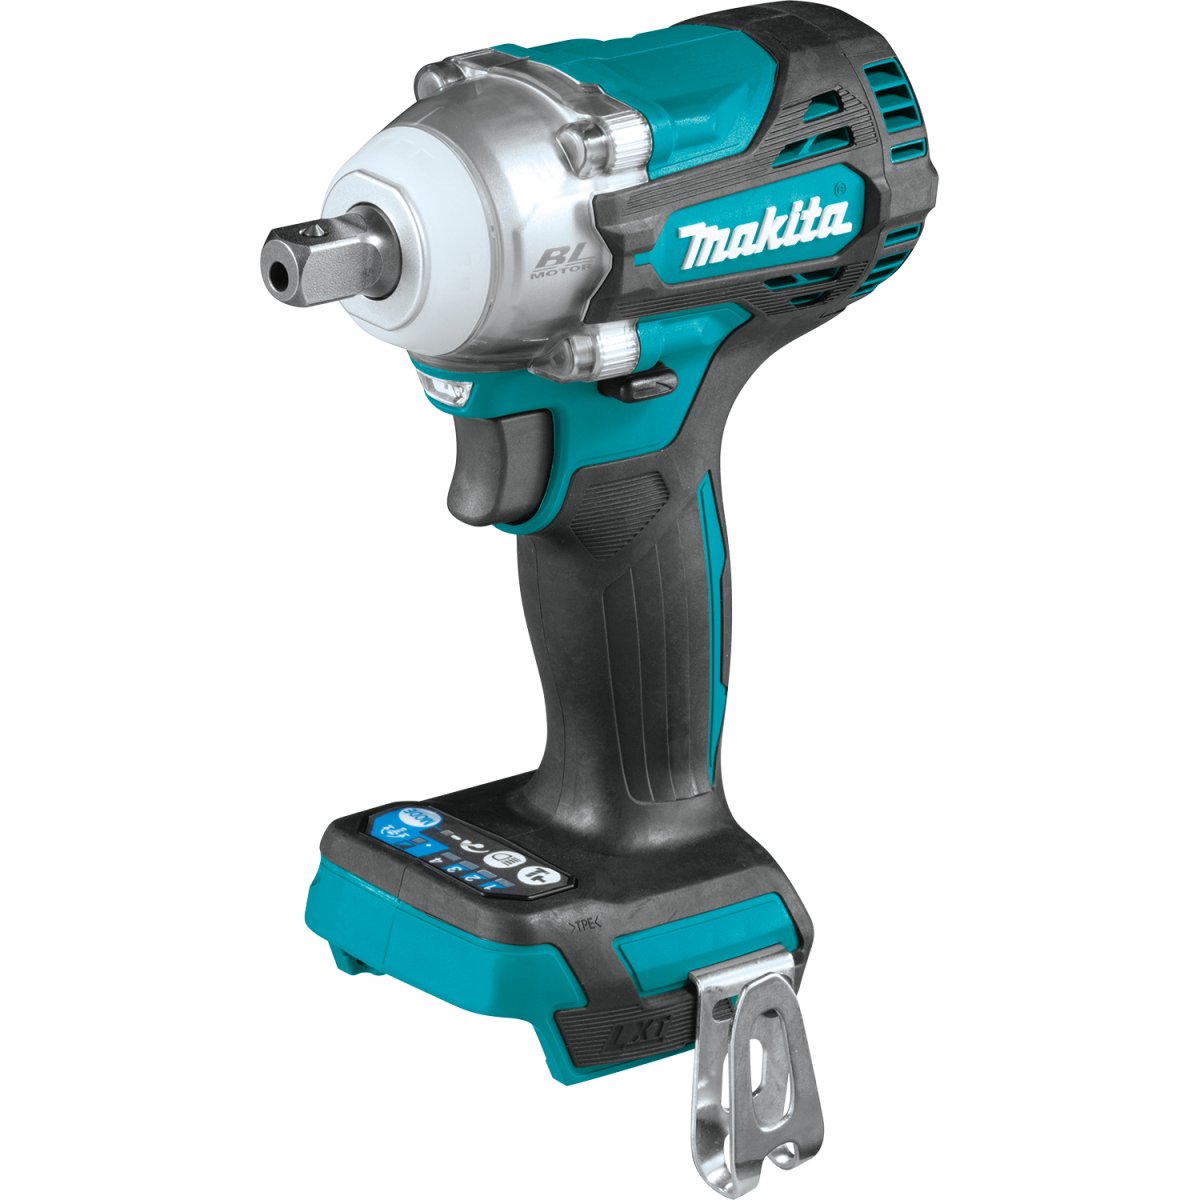 18V LXT® Lithium‑Ion Brushless Cordless 4‑Speed 1/2" Sq. Drive Impact Wrench w/ Detent Anvil - Diamond Tool Store